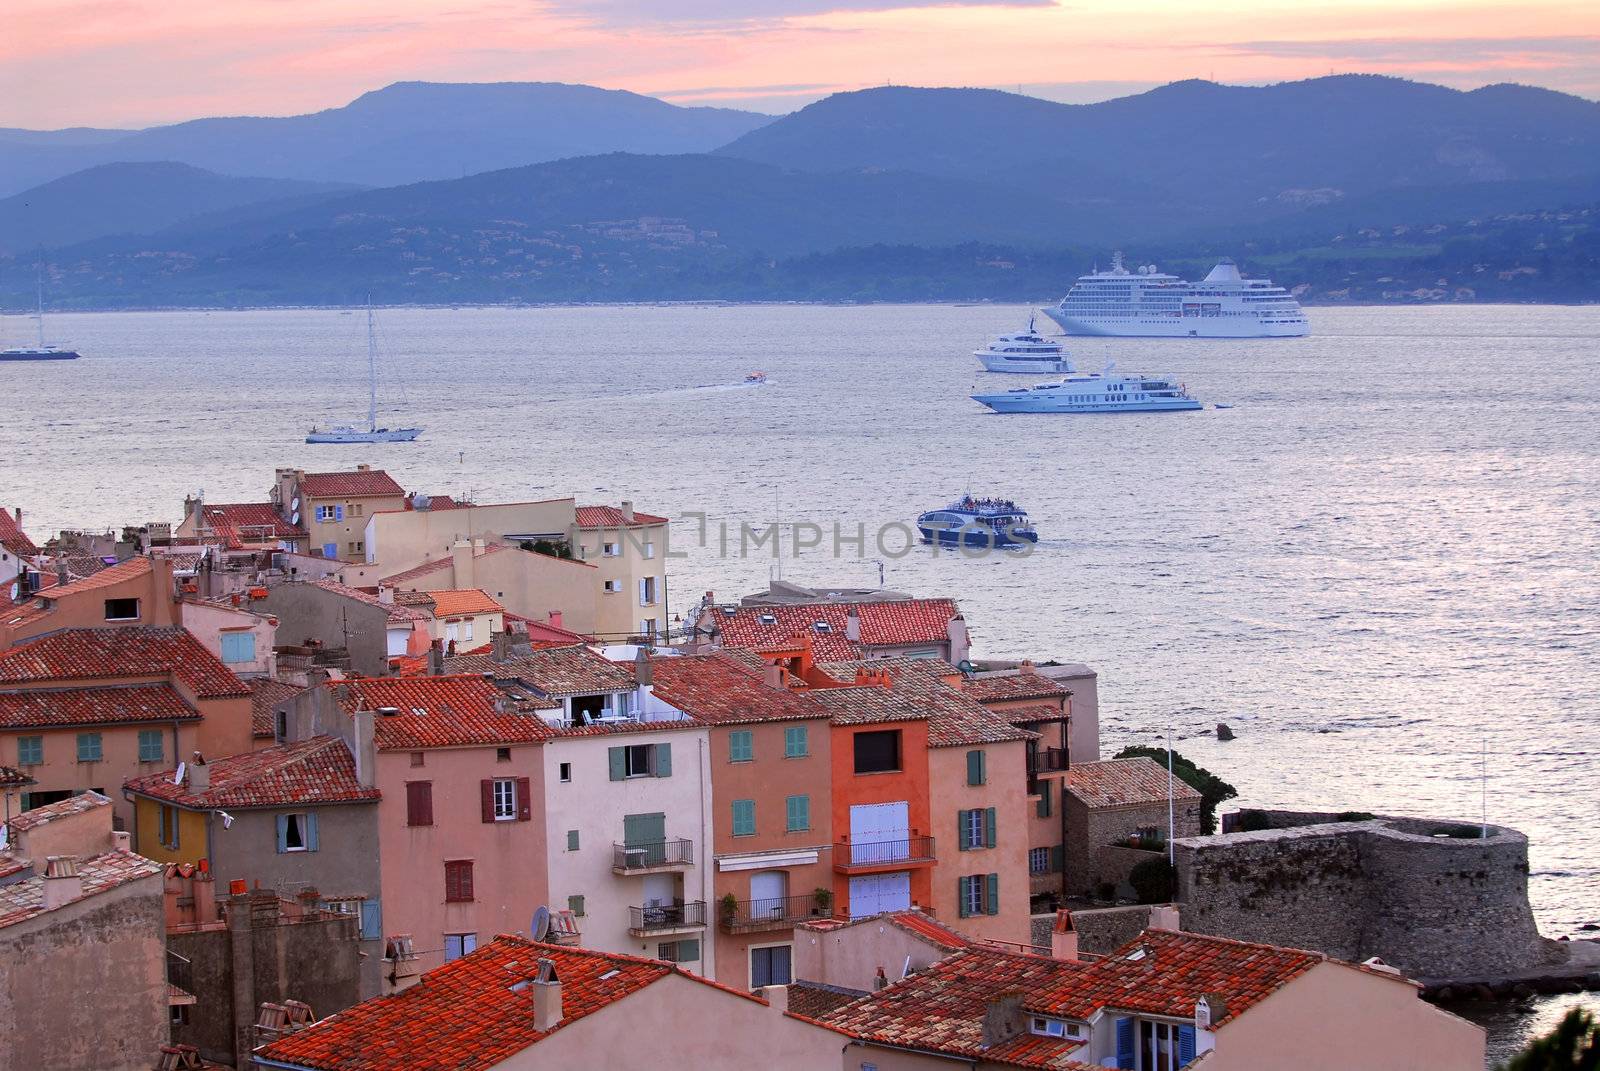 St.Tropez at sunset by elenathewise